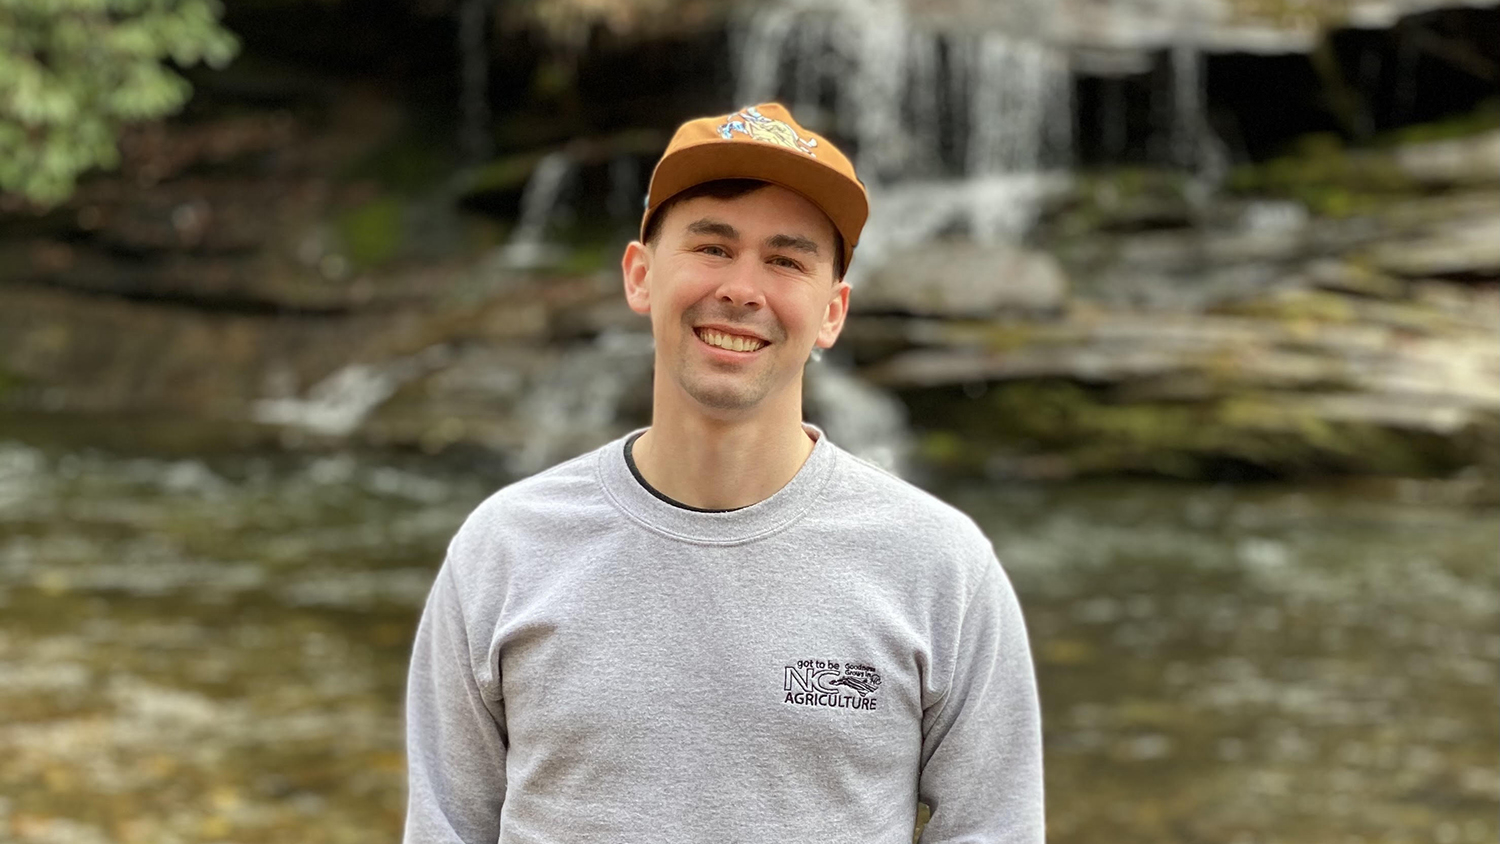 Alex Reinwald near a Waterfall - Alex Reinwald Is NC State's 2021 Esri Innovation Program Student of the Year - College of Natural Resources at NC State University